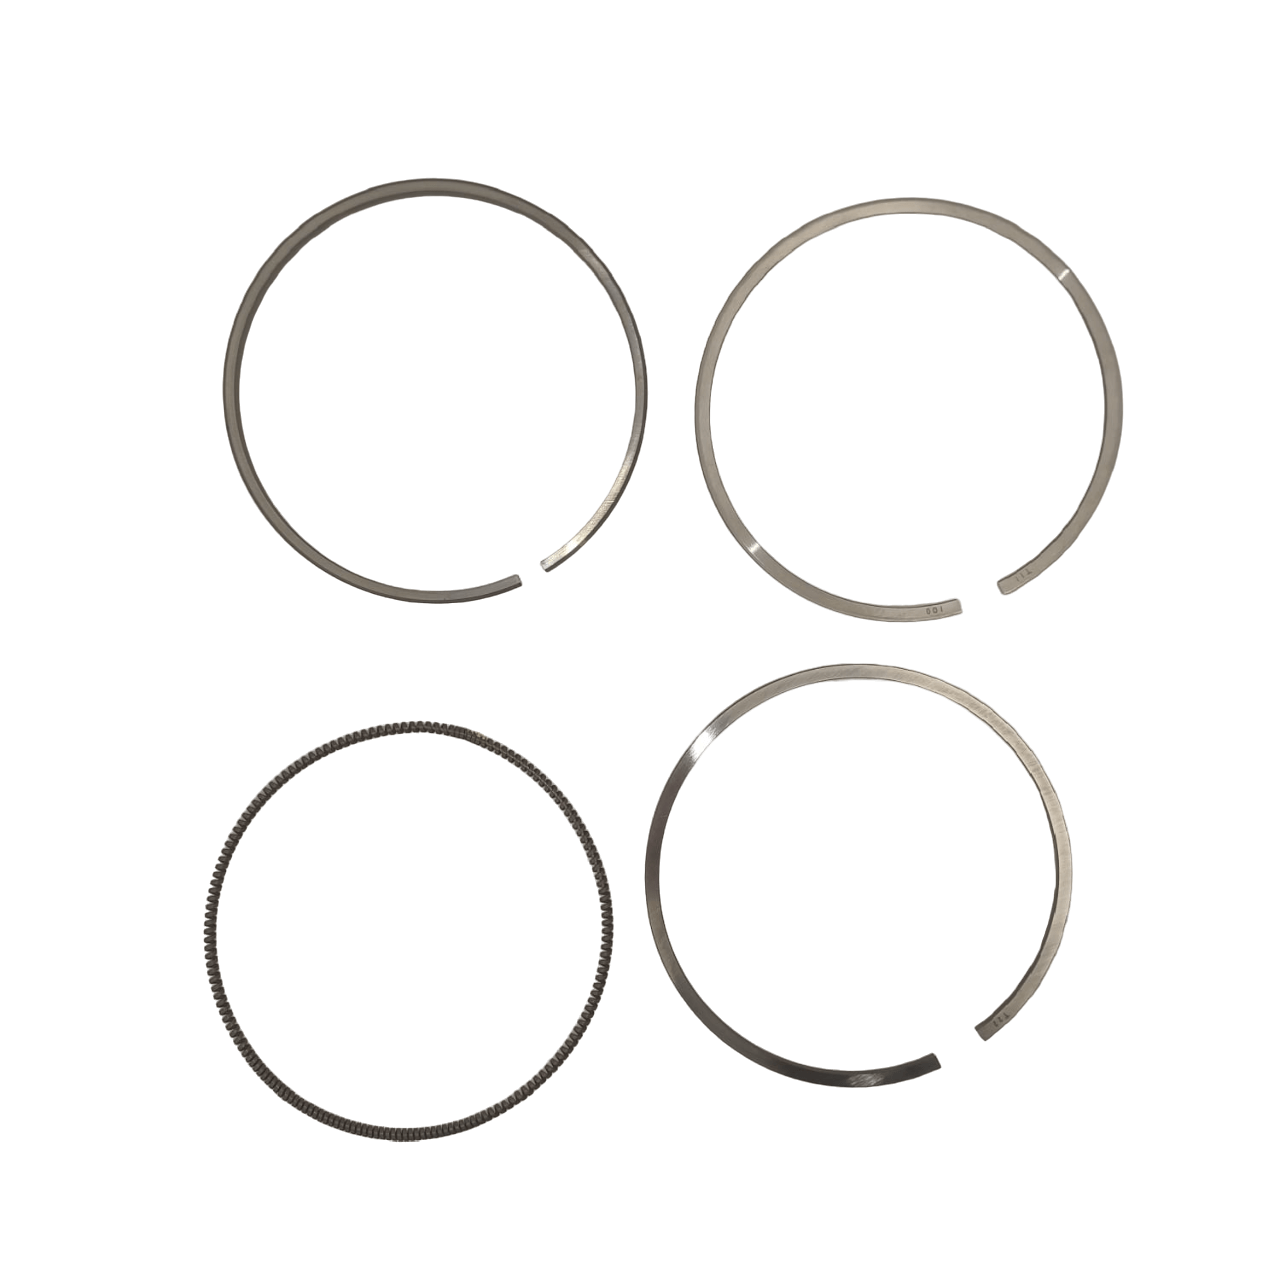 MH Spares 1mm Oversized Piston Ring Set (1mm Oversized) for Toyota 3Z Engine